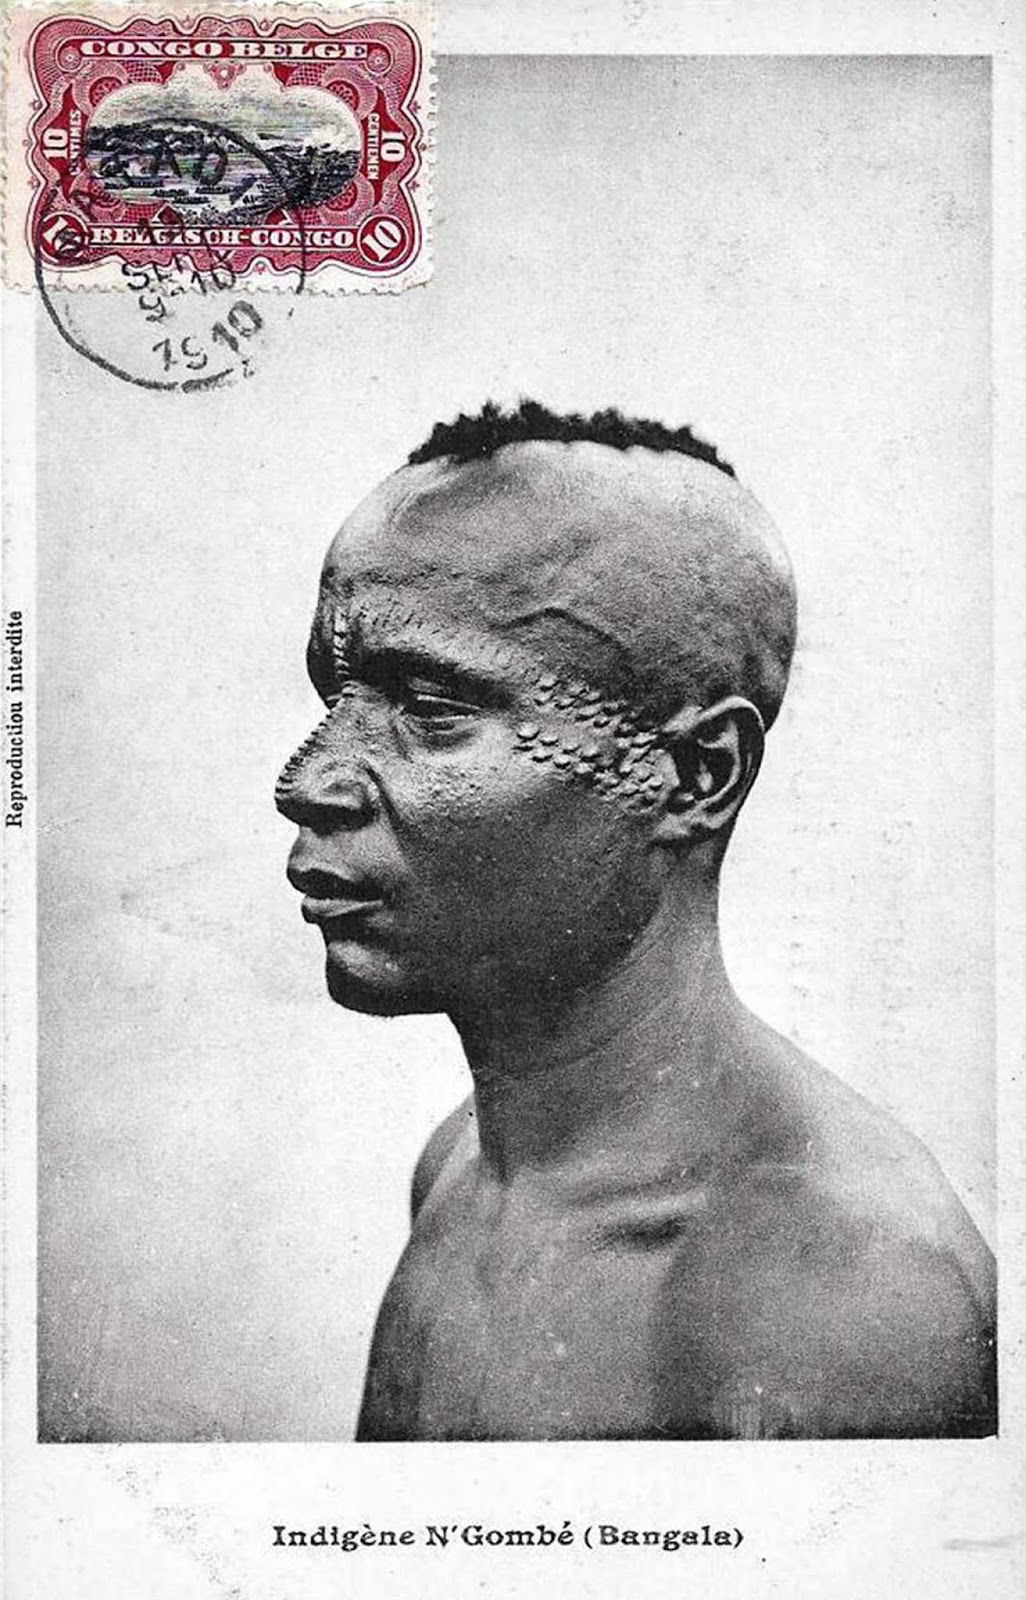 Native African from Bangala.